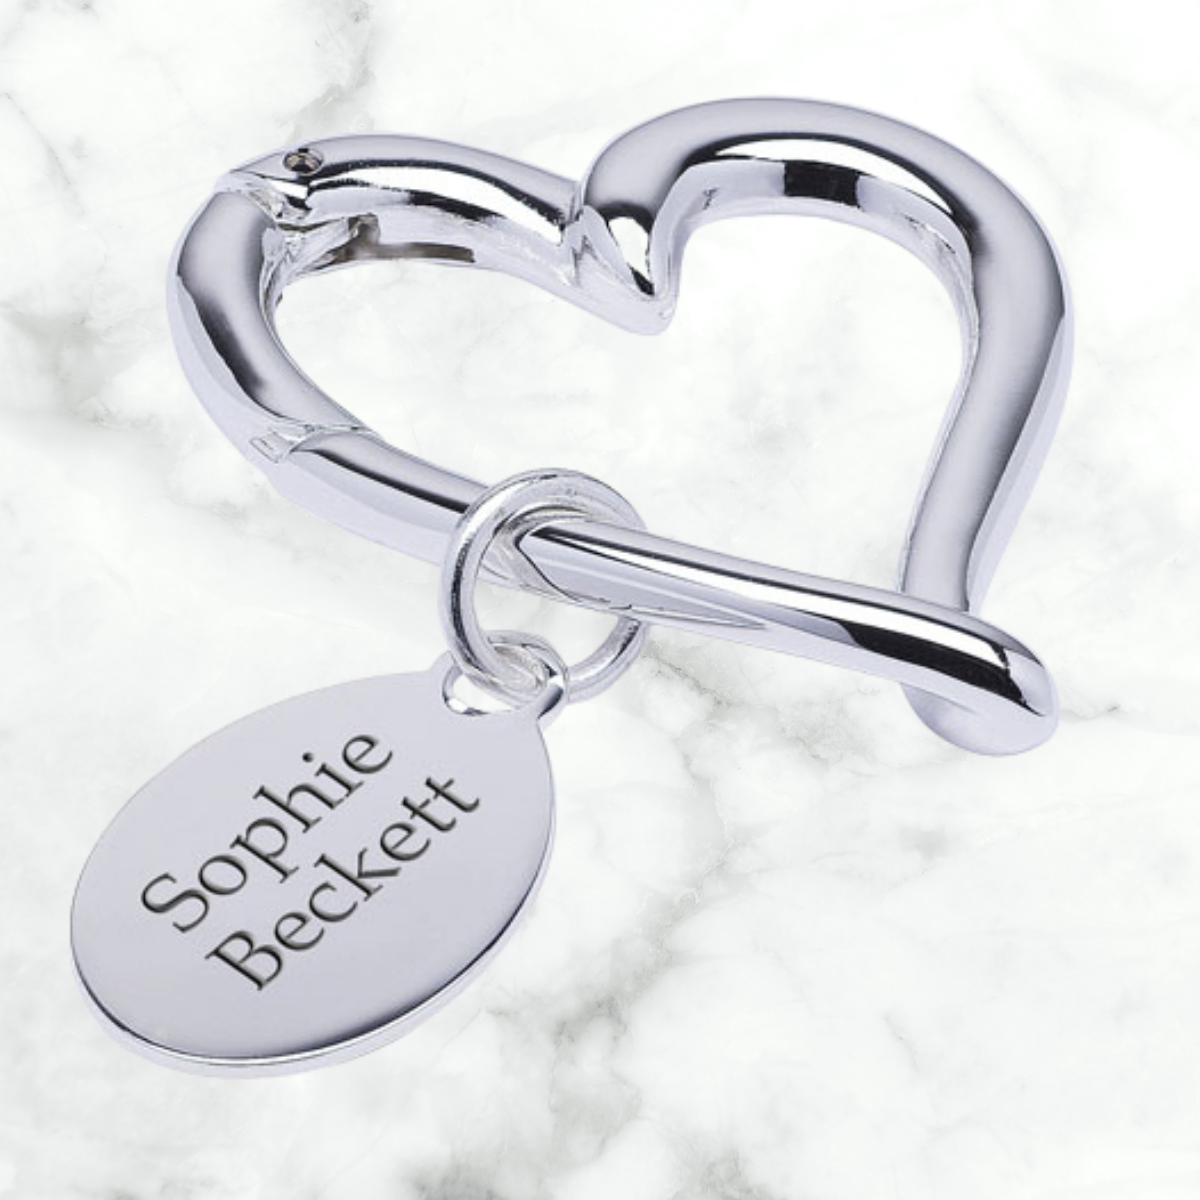 Image of a personalised silver coloured open heart keyring with a label that can be engraved with a name of your choice